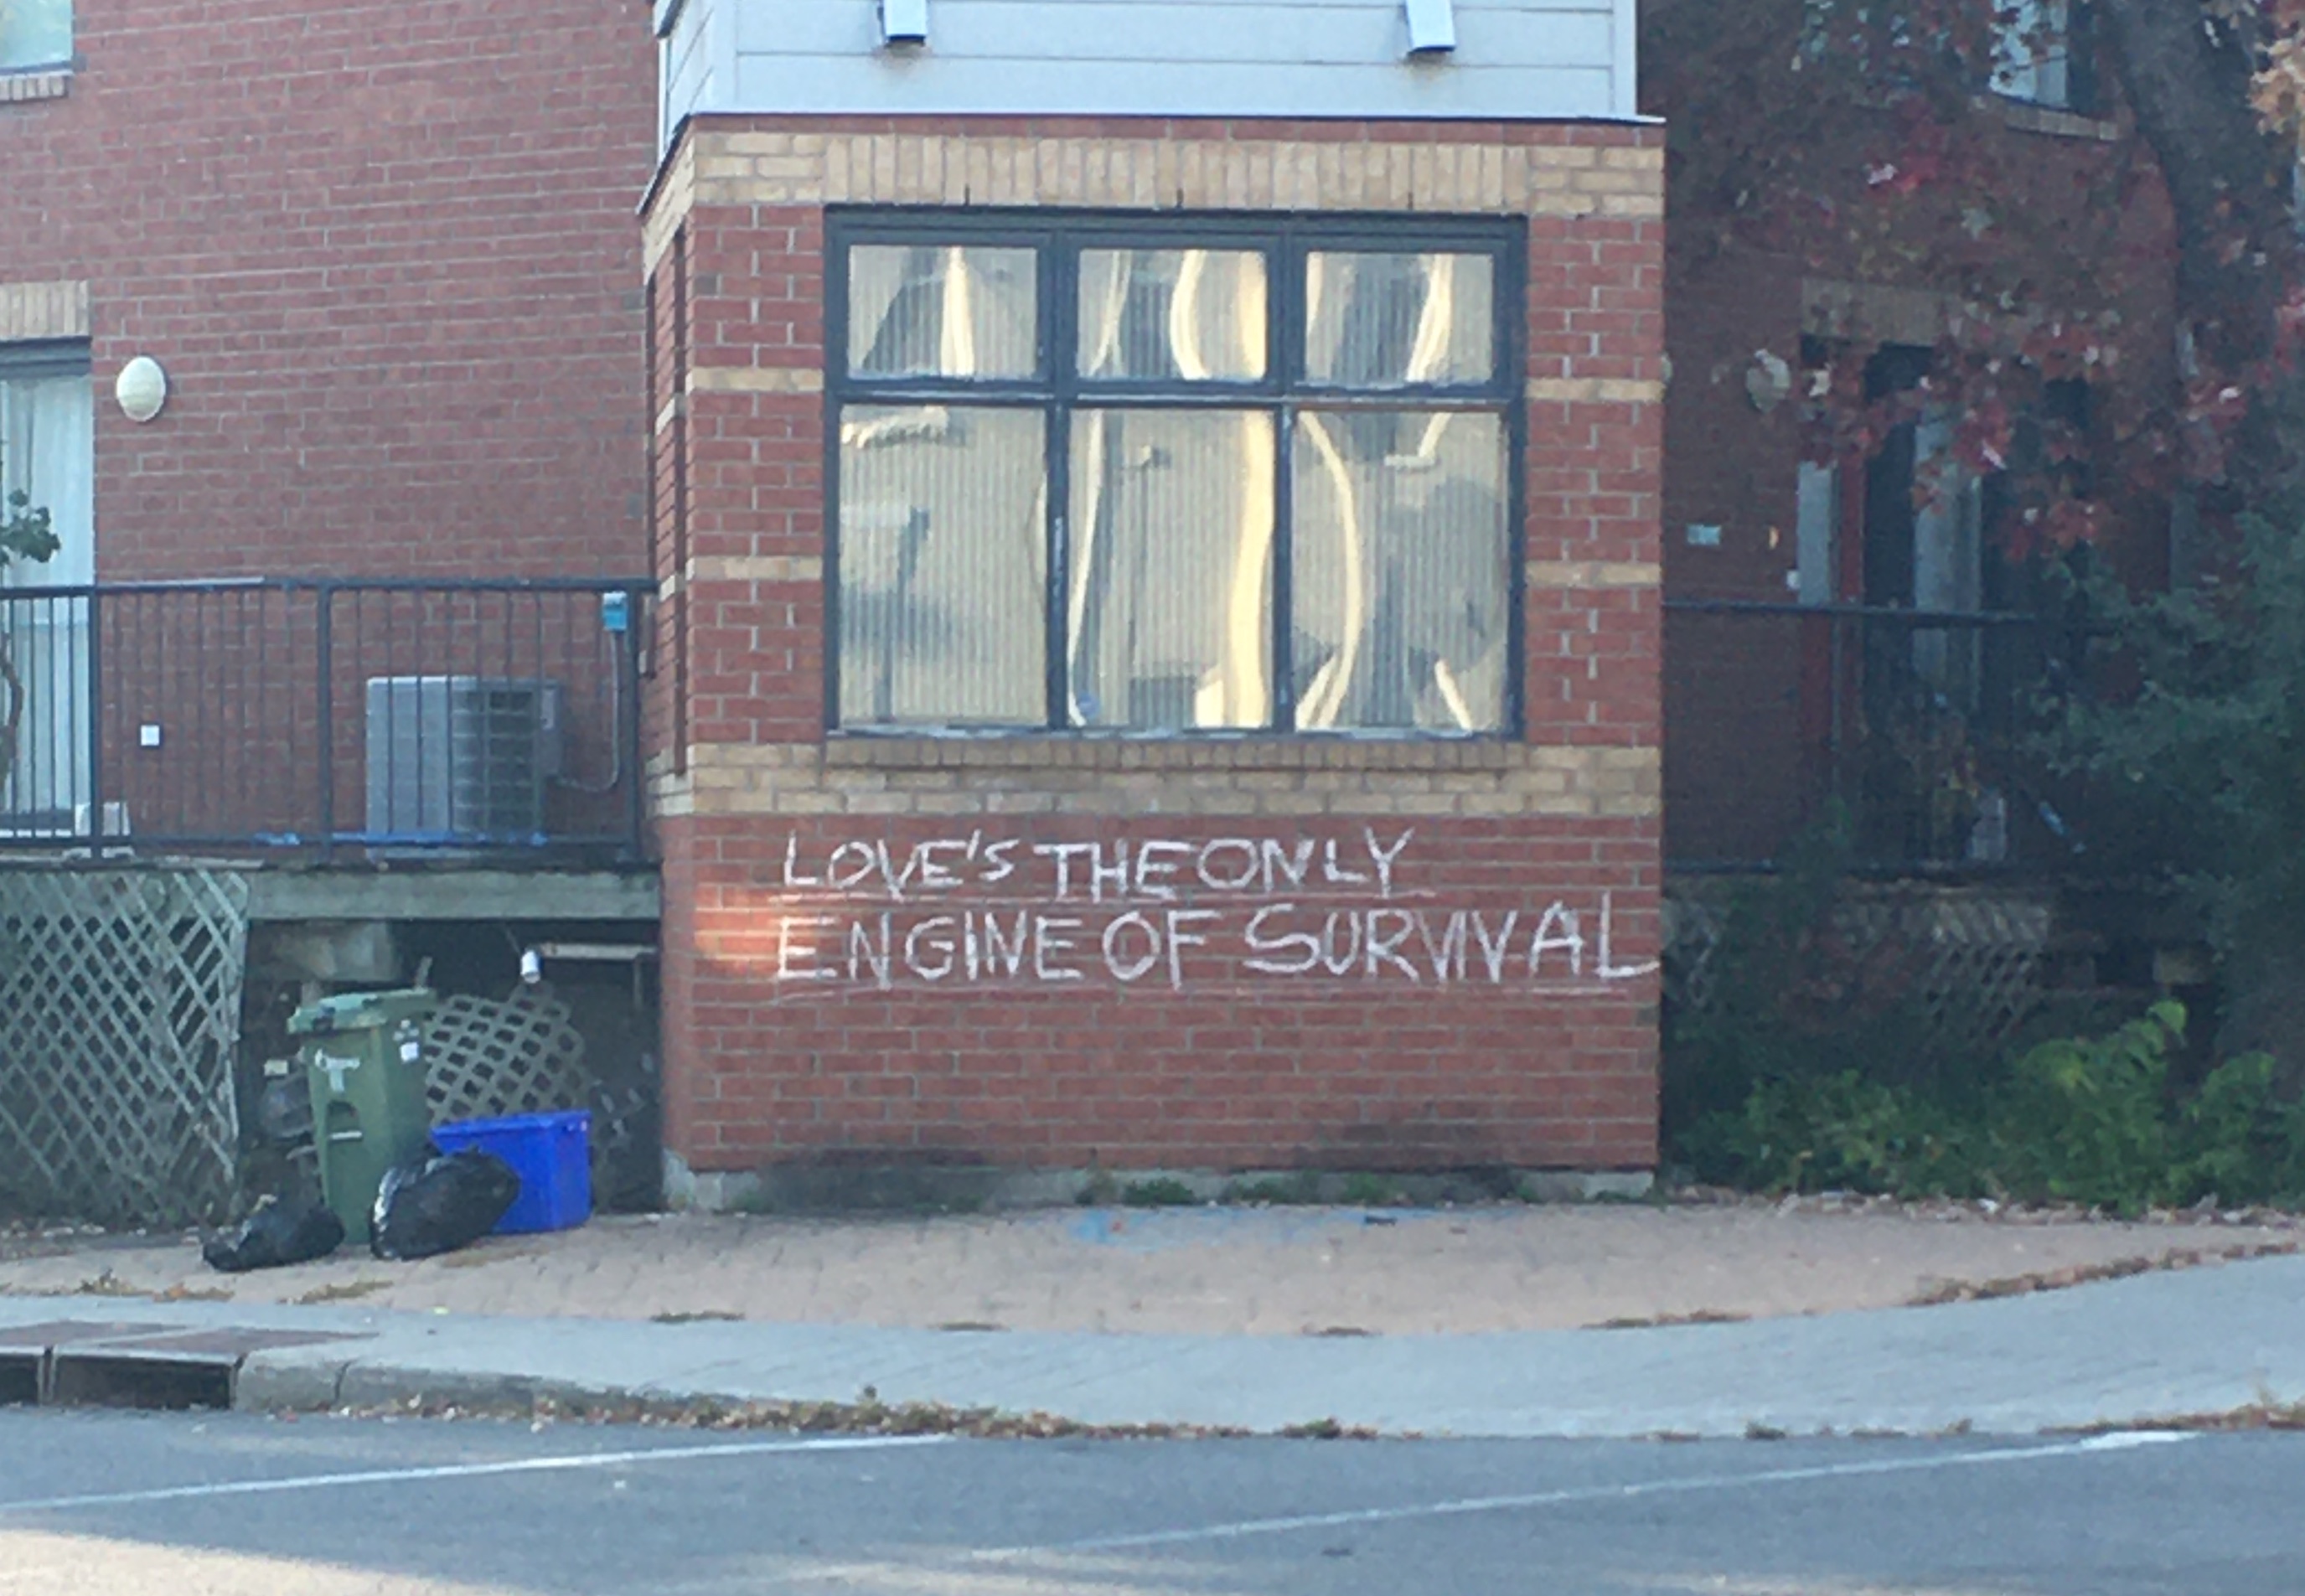 Chalk graffiti reading "Love is the only engine of survival"